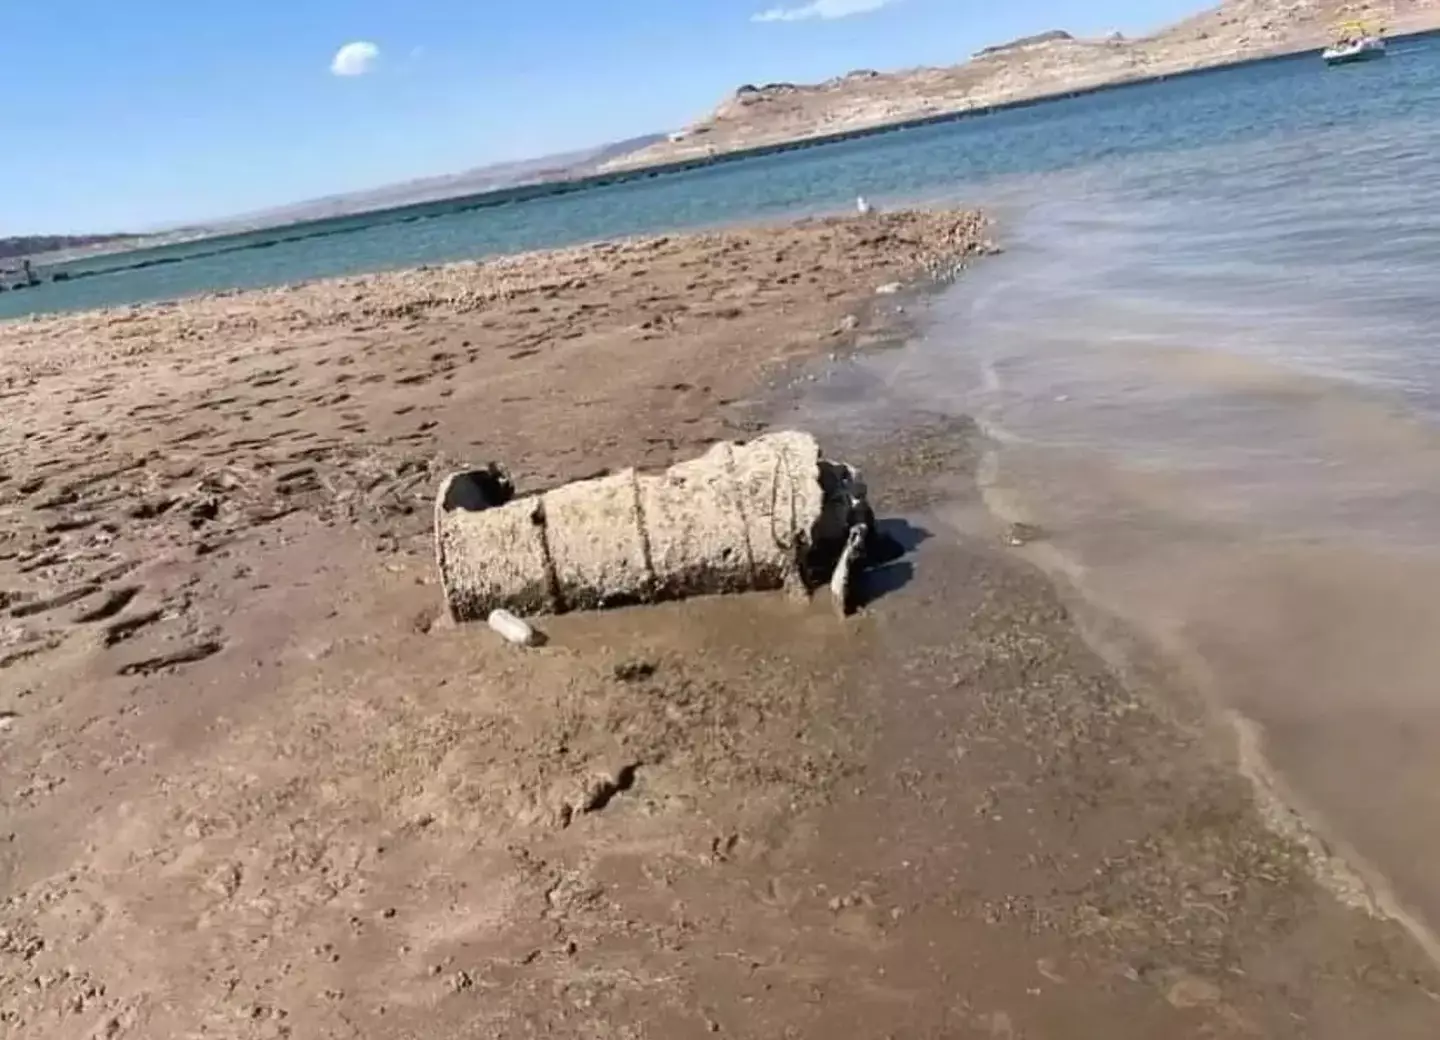 A barrel containing human remains was discovered at Lake Mead.